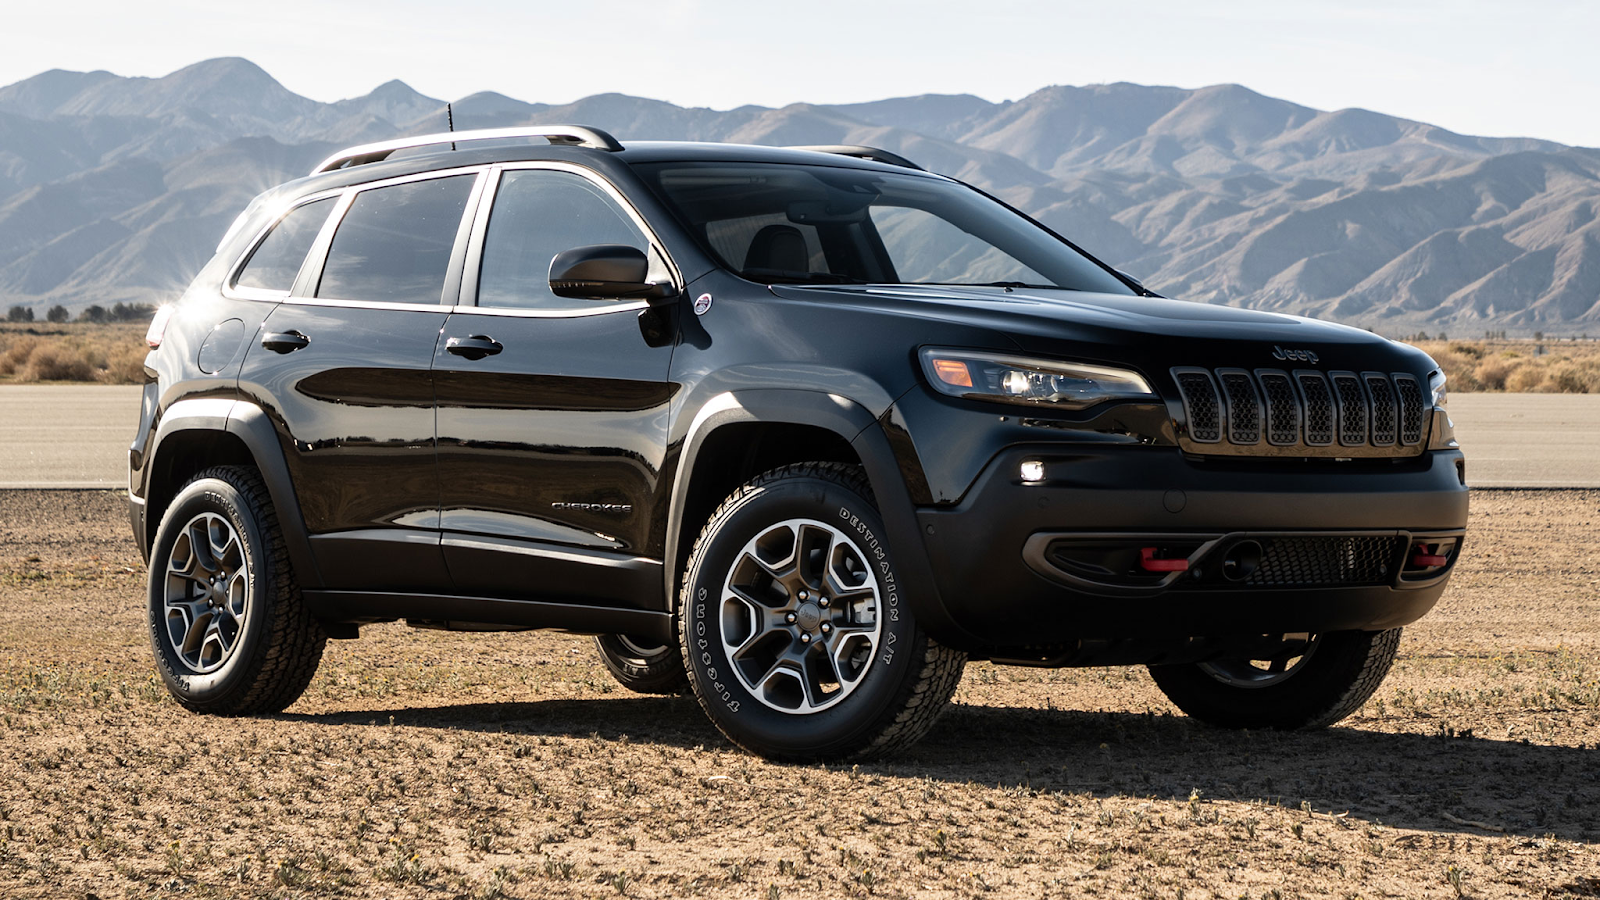 Which year model of used Jeep Cherokee is the best value?